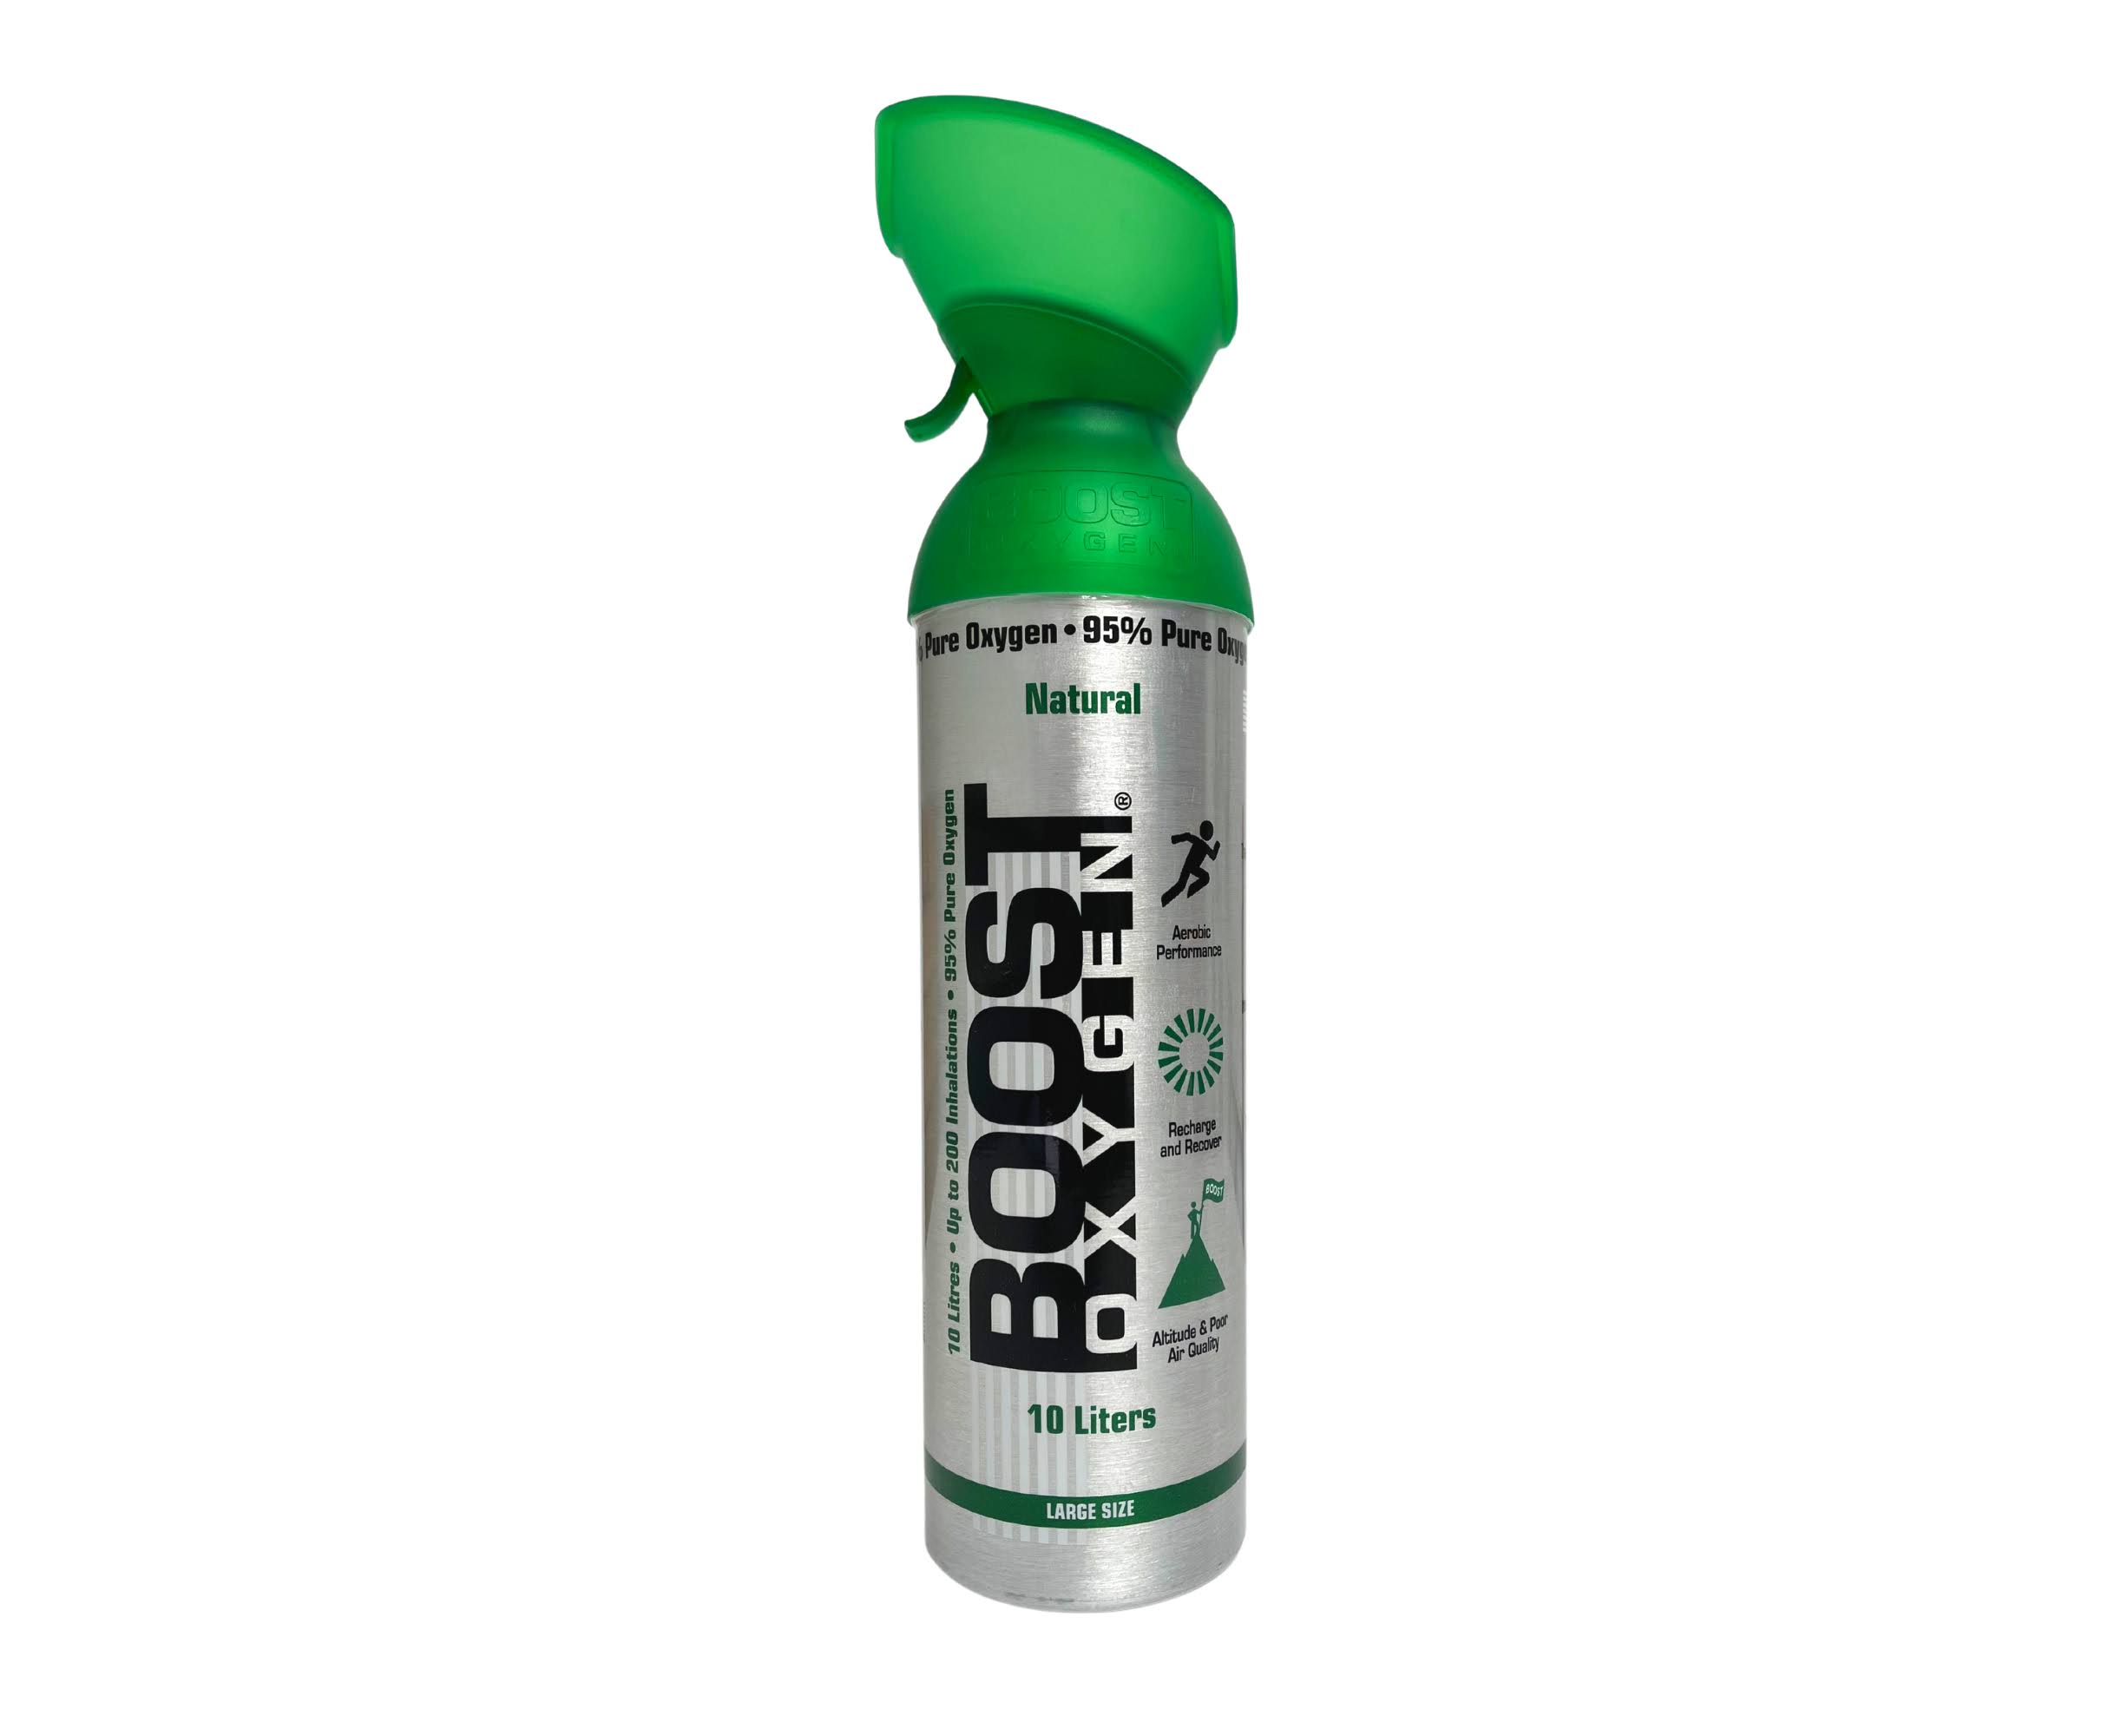 Boost Oxygen 95 Percent Pure Oxygen - Natural, Large